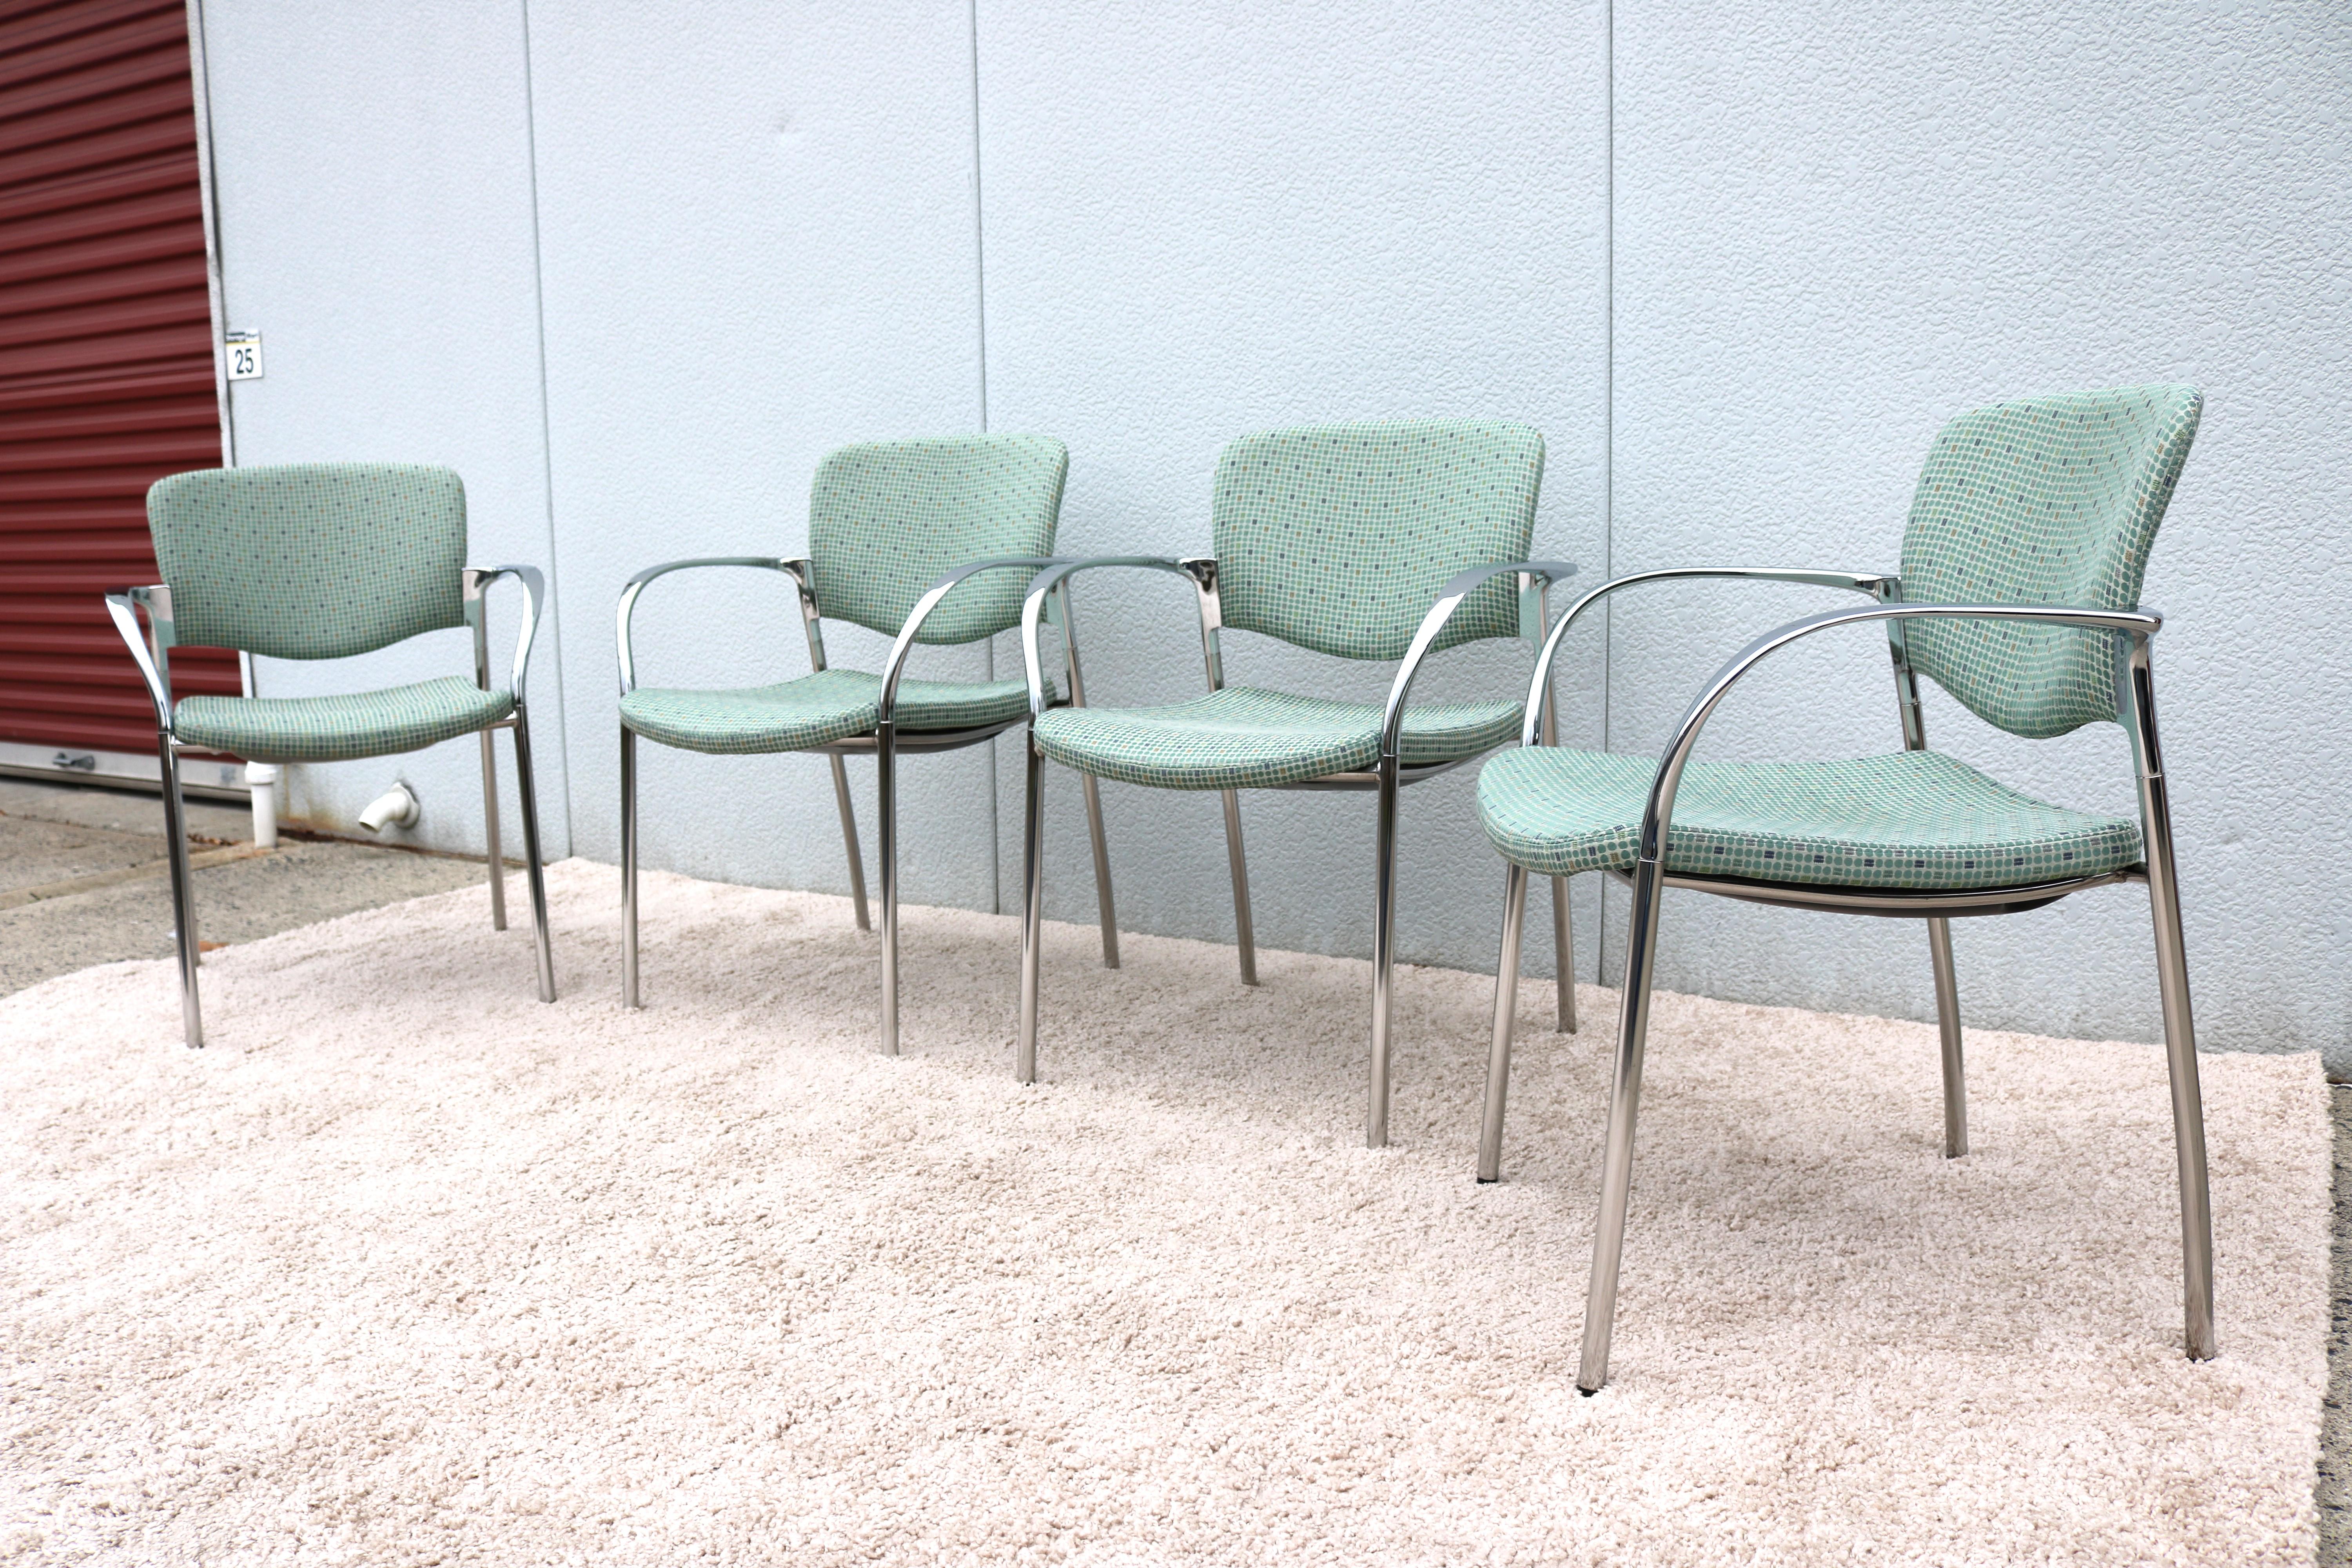 American Modern Stylex Welcome Multi Use Green Stacking Guest or Dining Chairs, Set of 4